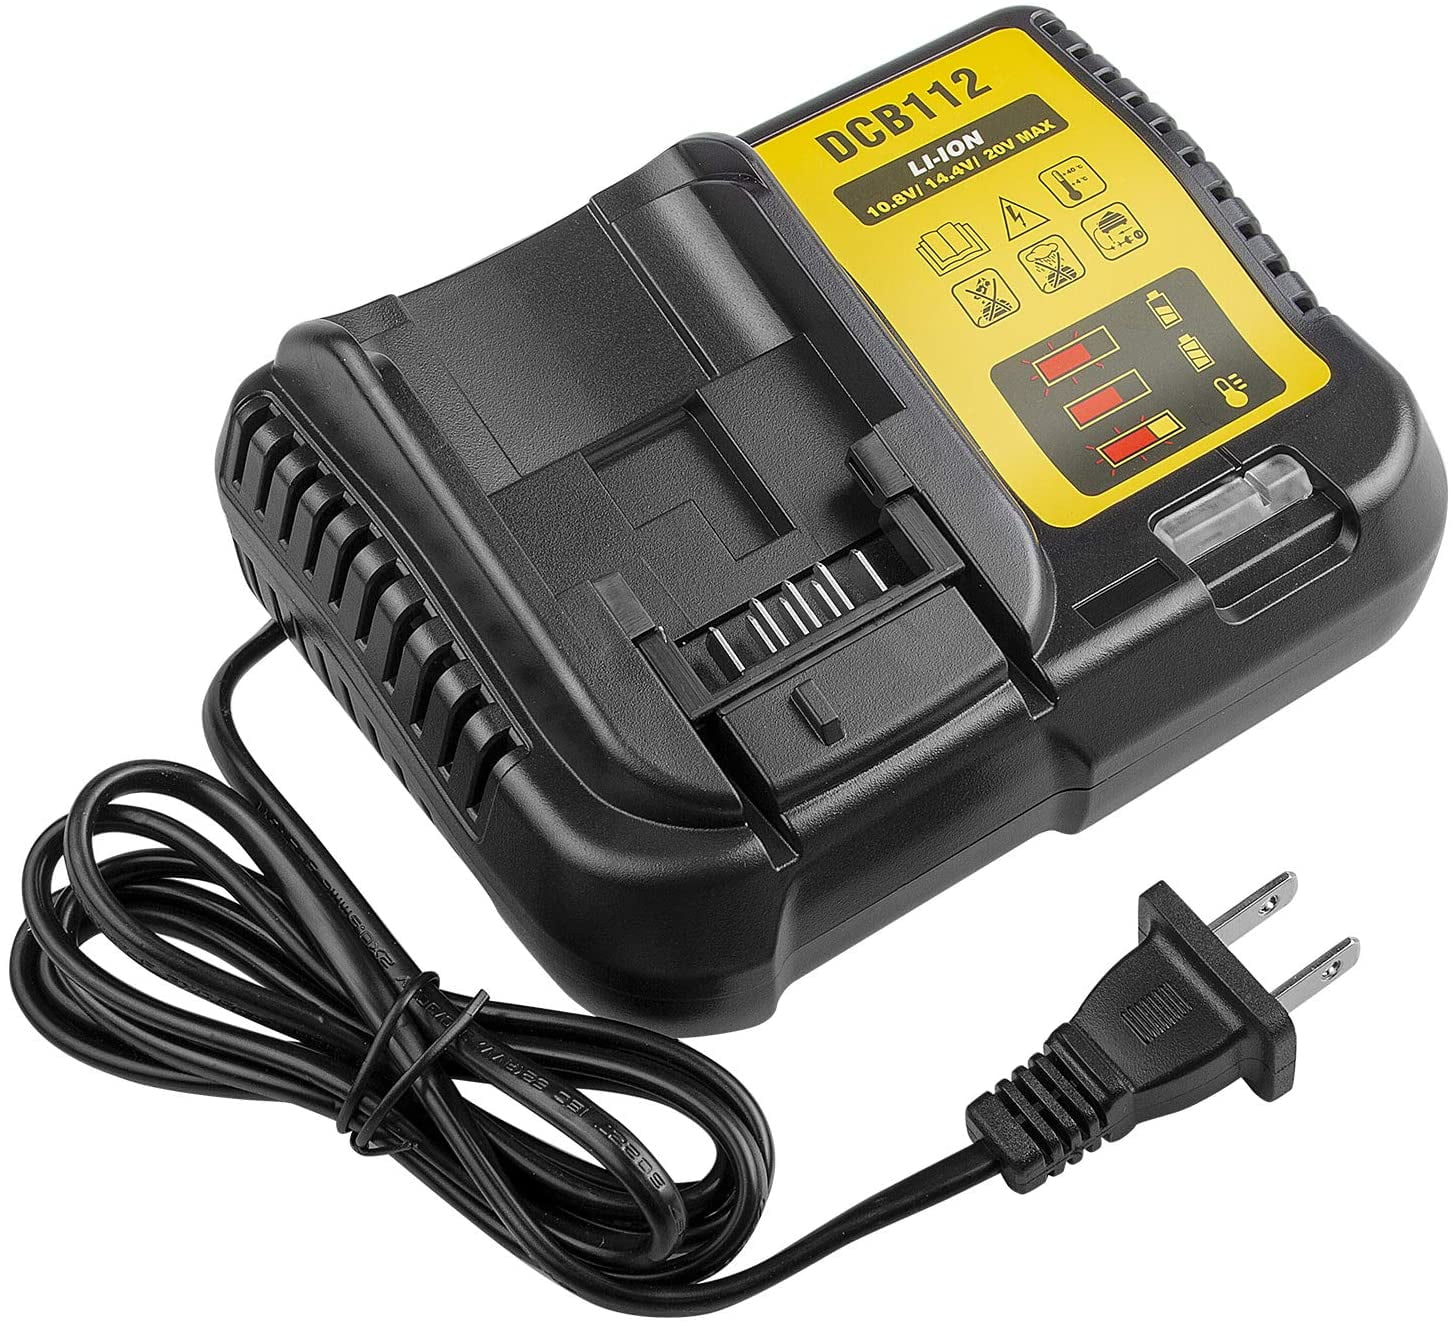 ANOPIW Replacement of Dewalt 20v battery charger DCB112 Compatible with Dewalt Battery Charger DCB112 DCB115 DCB118 DCB102BP DCB107 to Charge Dewalt 12V 20V MAX Lithium Battery DCB206 DCB205 DCB120...